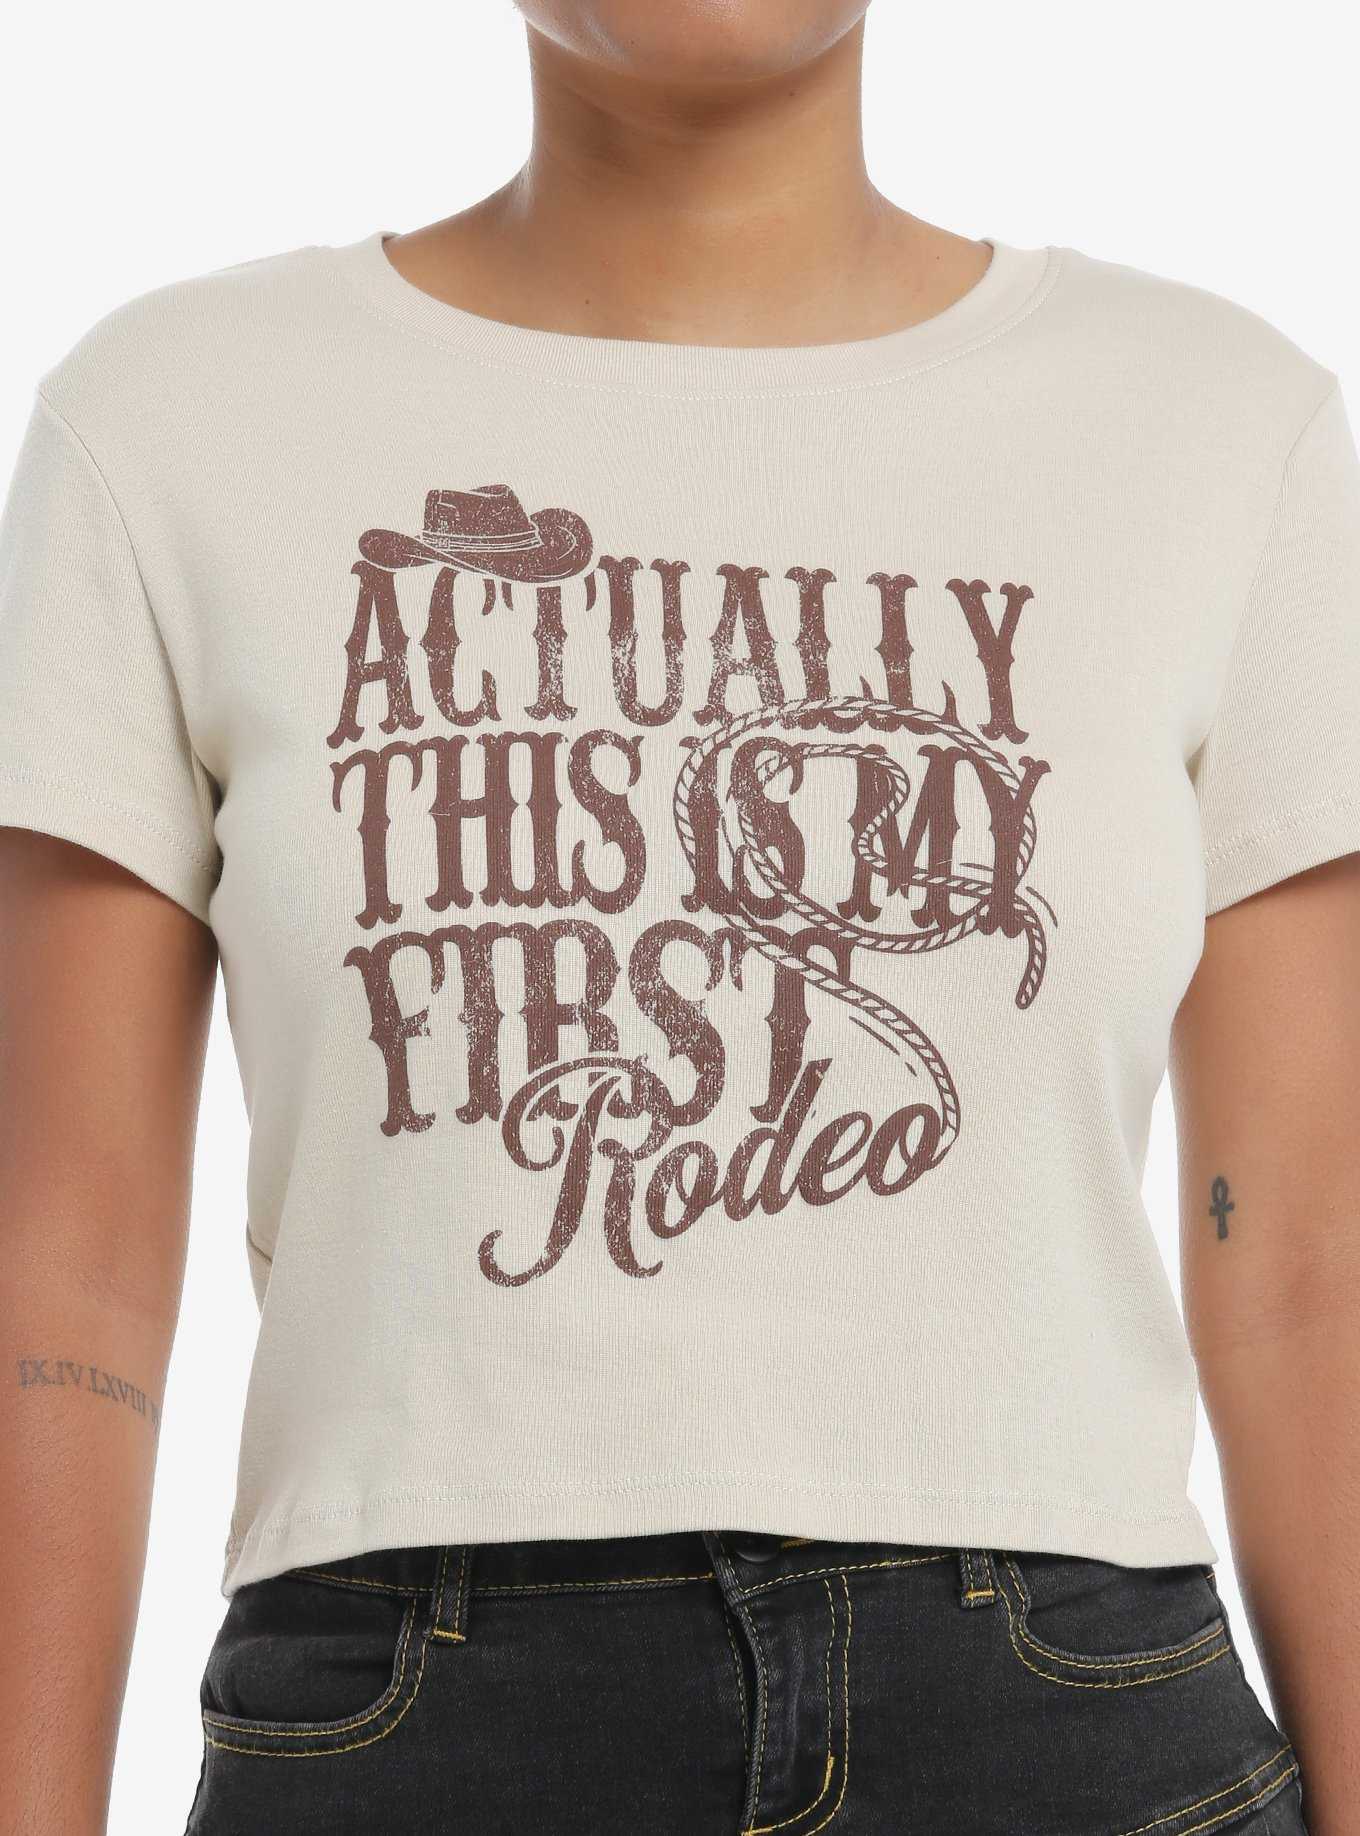 This Is My First Rodeo Girls Baby T-Shirt, , hi-res